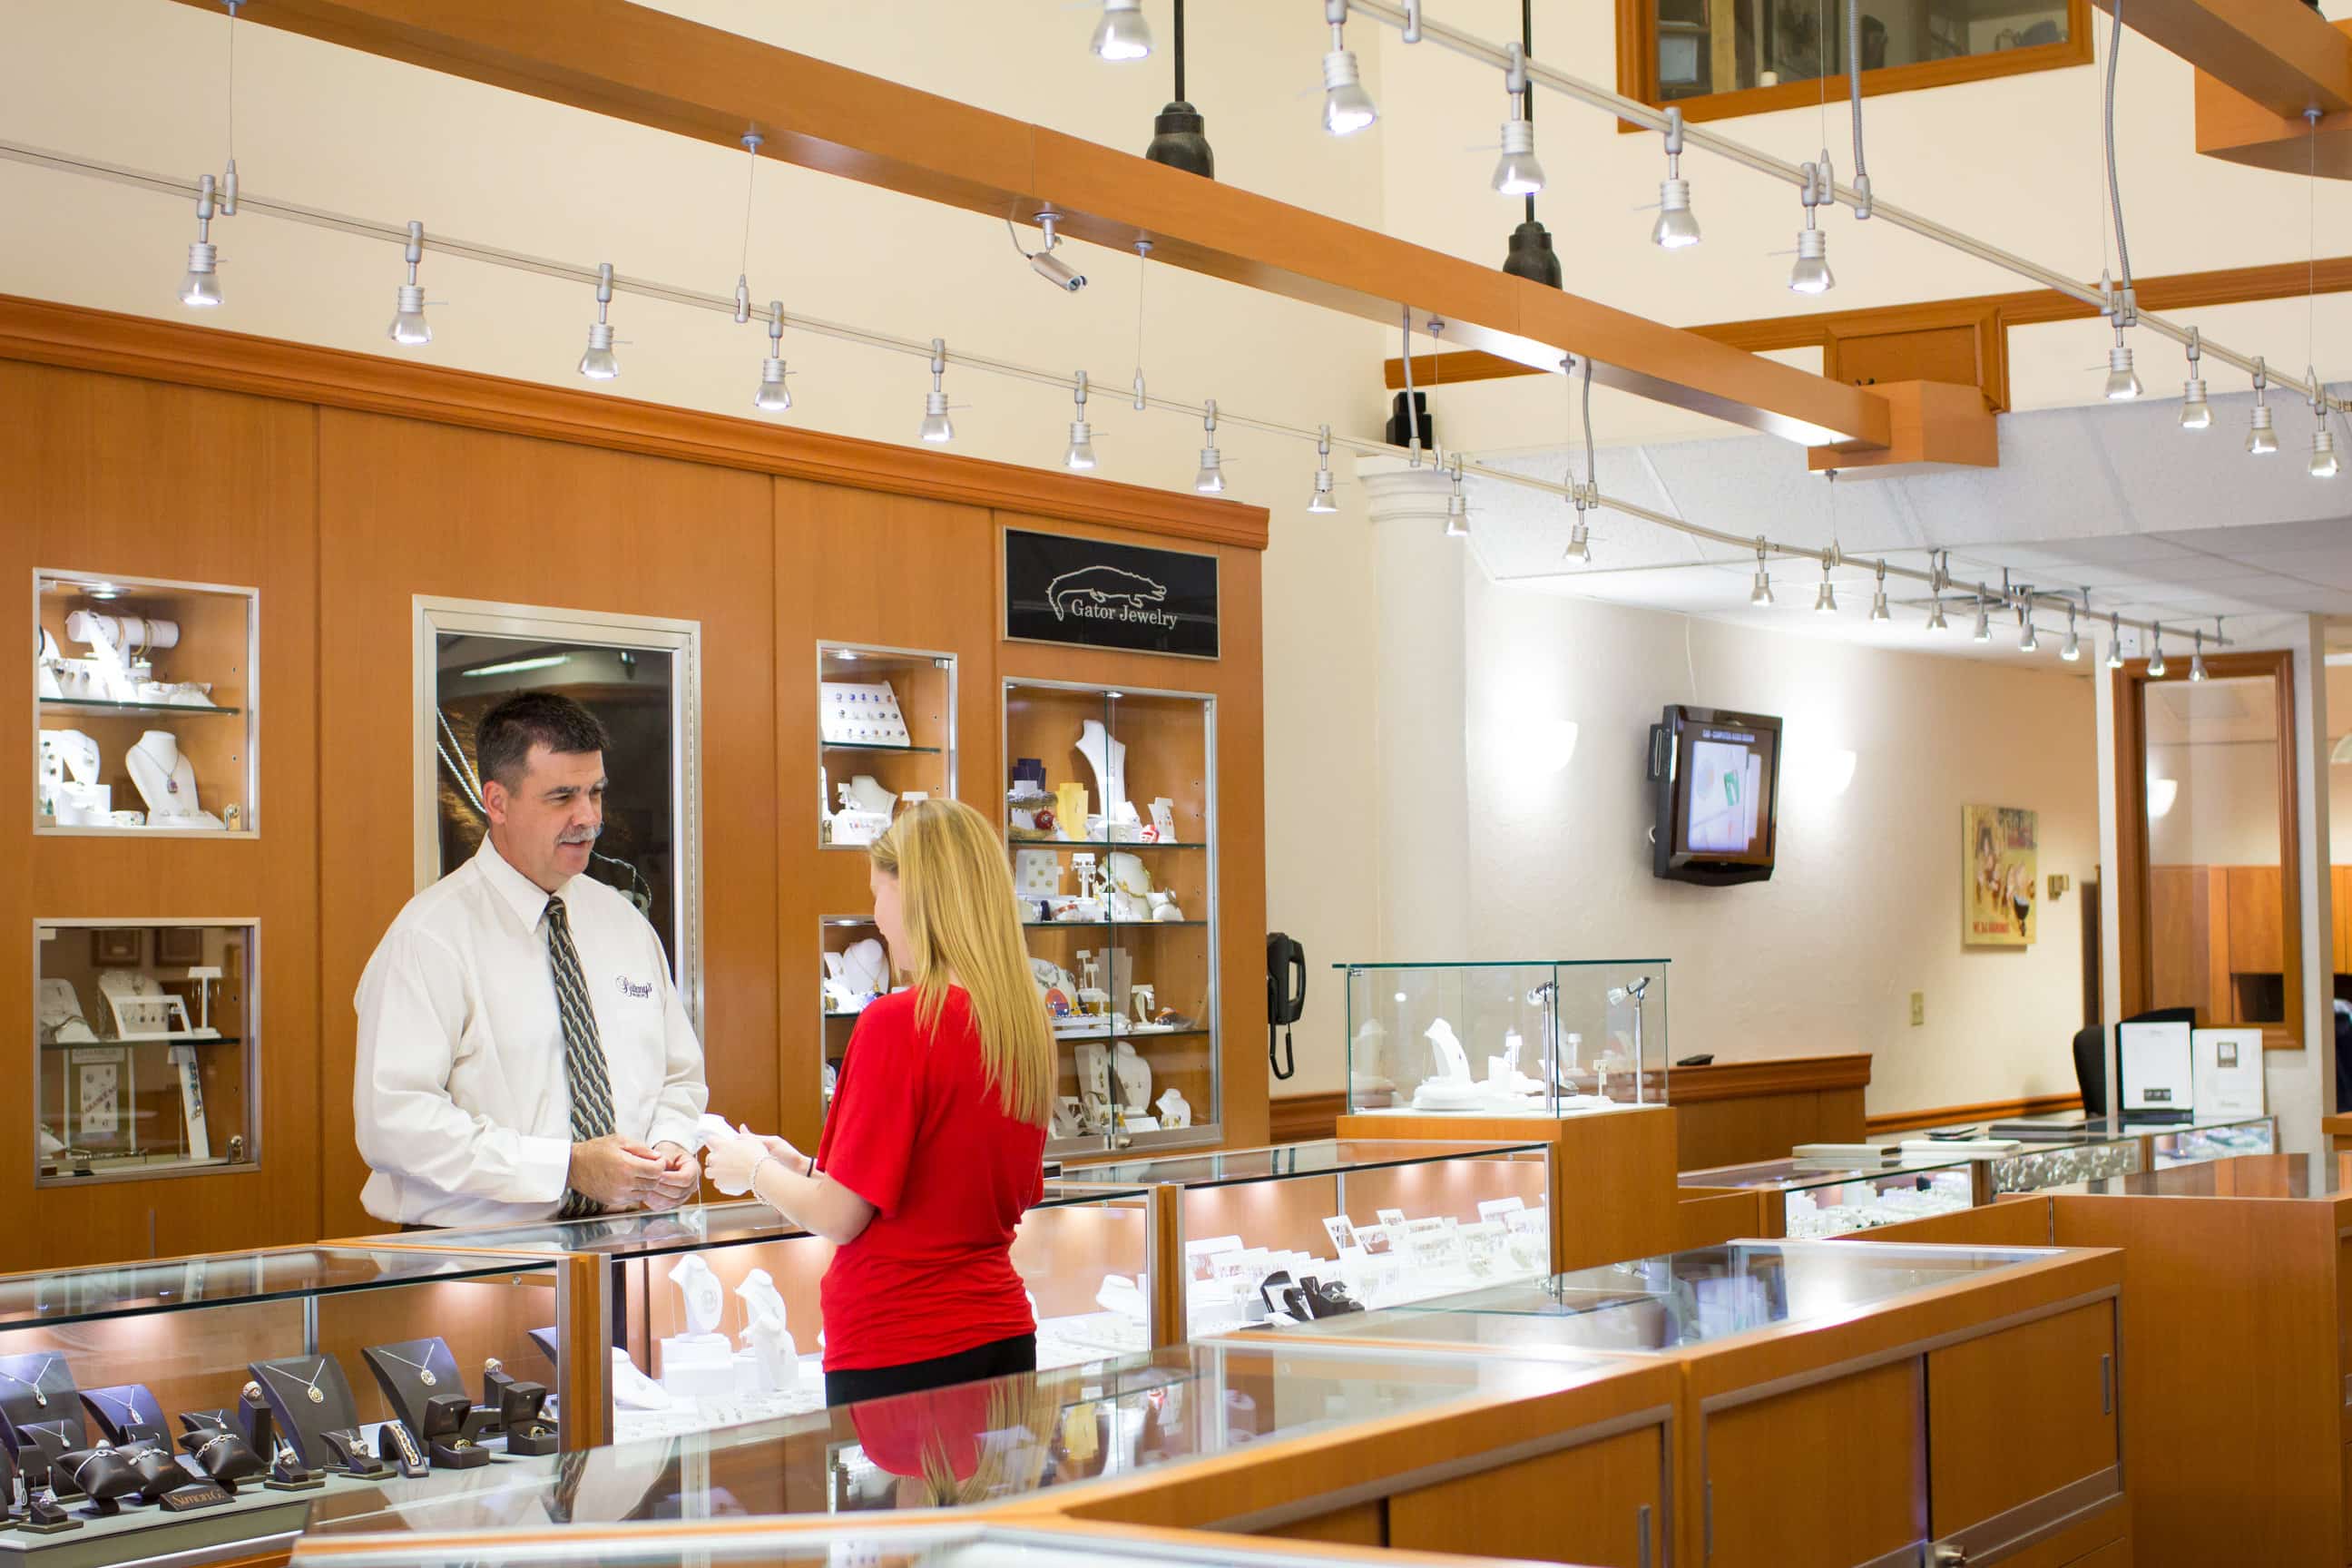 A local jewelry shop with the owner and a client at the counter